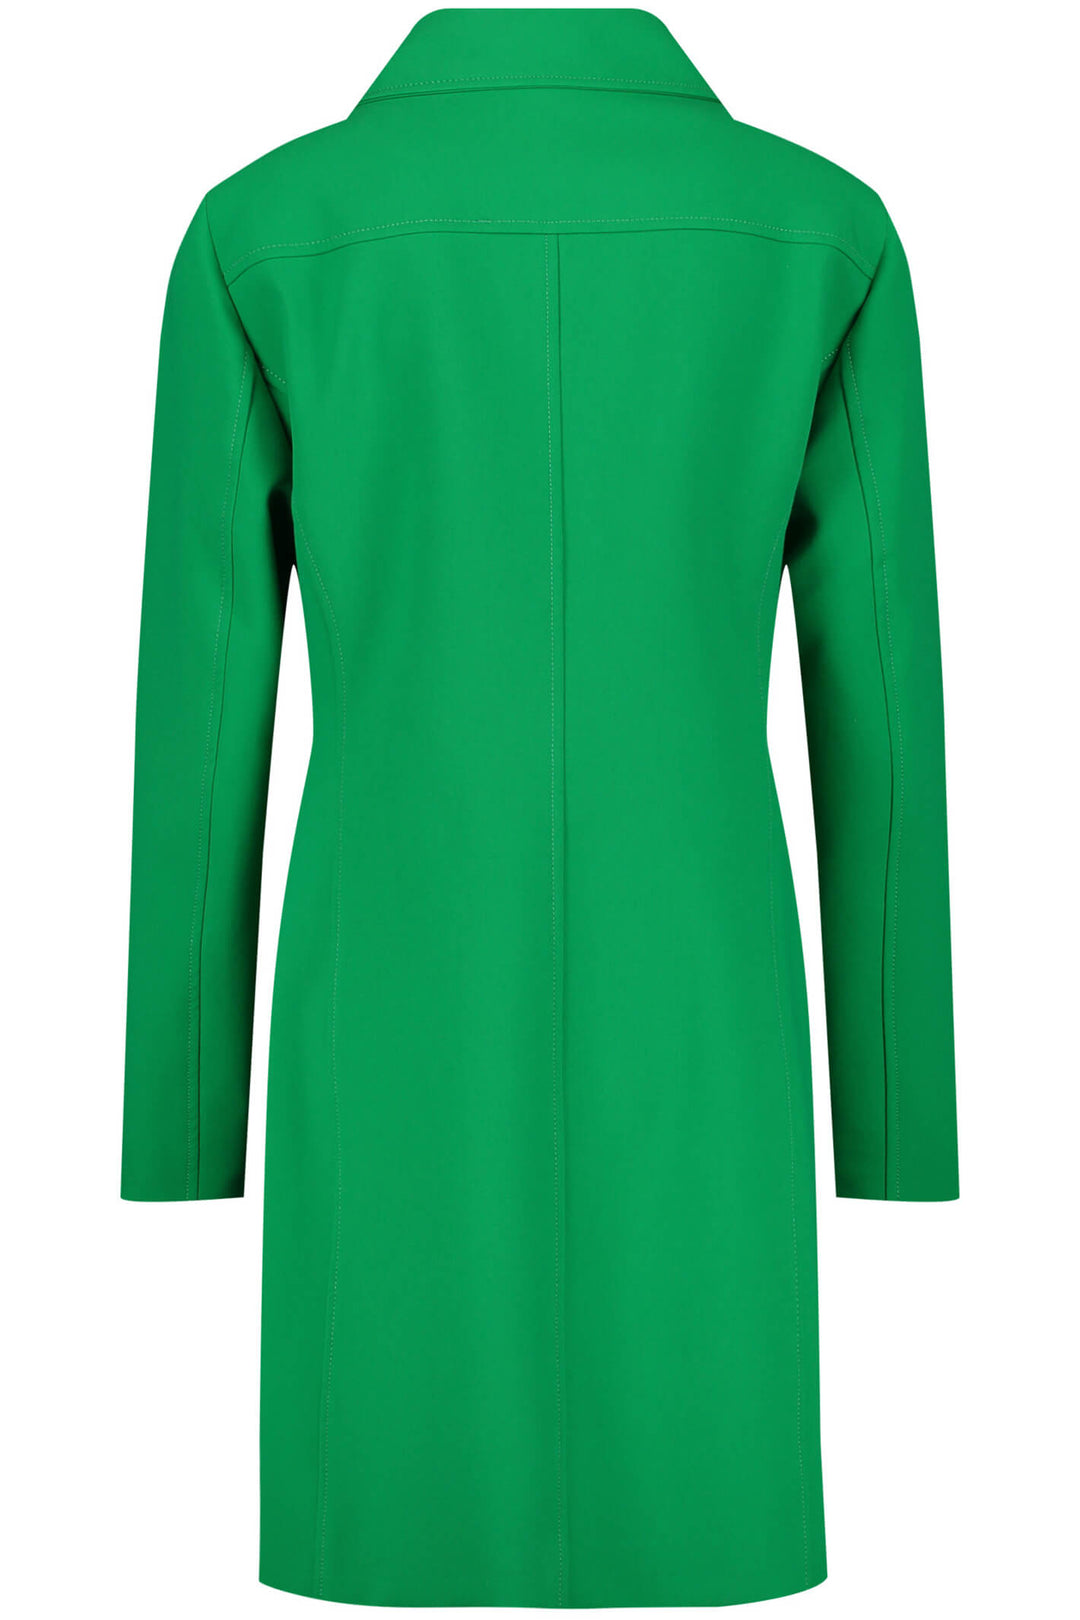 Gerry Weber 150003 Vibrant Green Coat - Experience Boutique